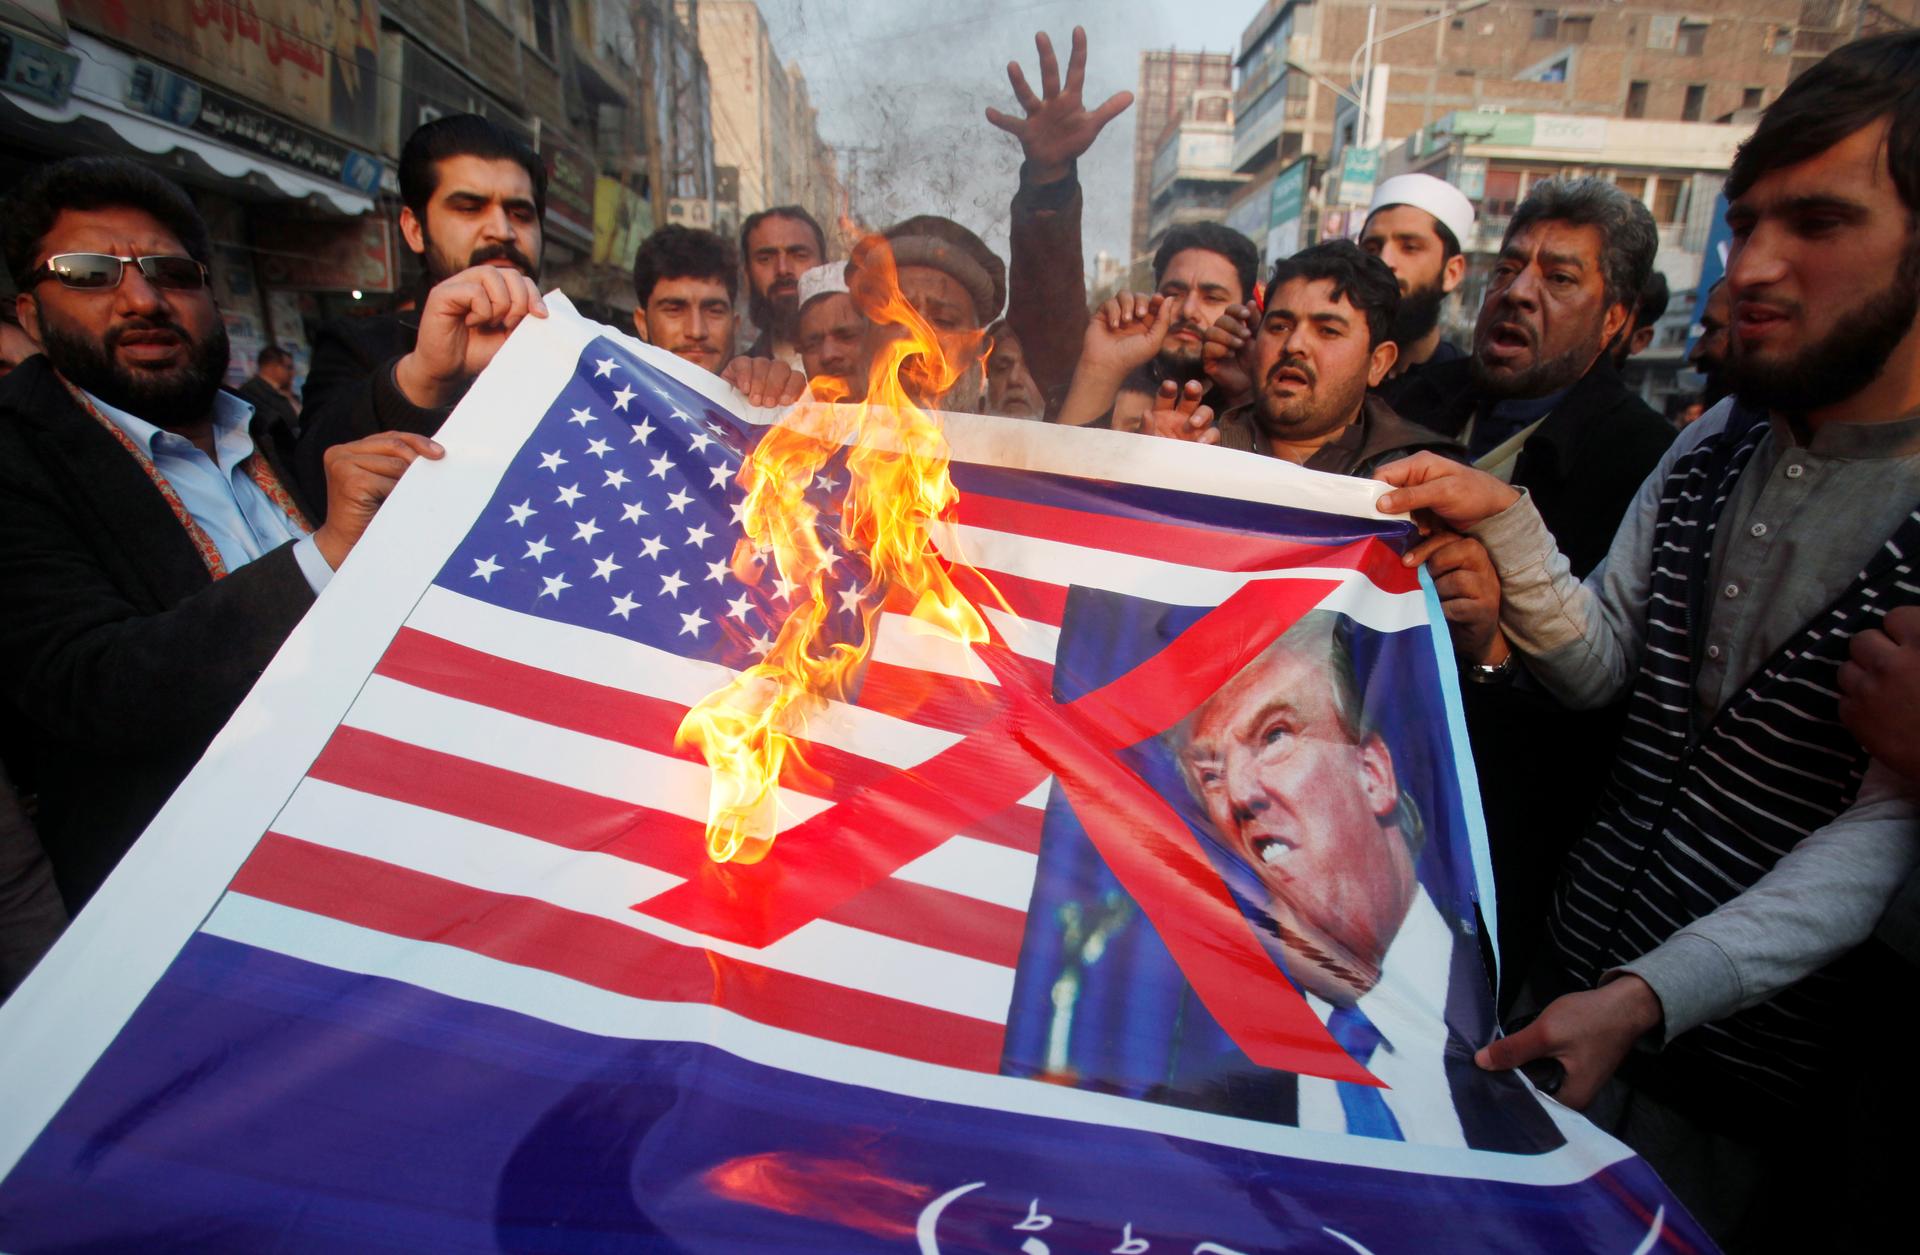 People burn a sign depicting a U.S. flag and a picture of U.S. President Donald Trump as they take part in an anti-U.S. rally in Peshawar, Pakistan, January 5, 2018. 